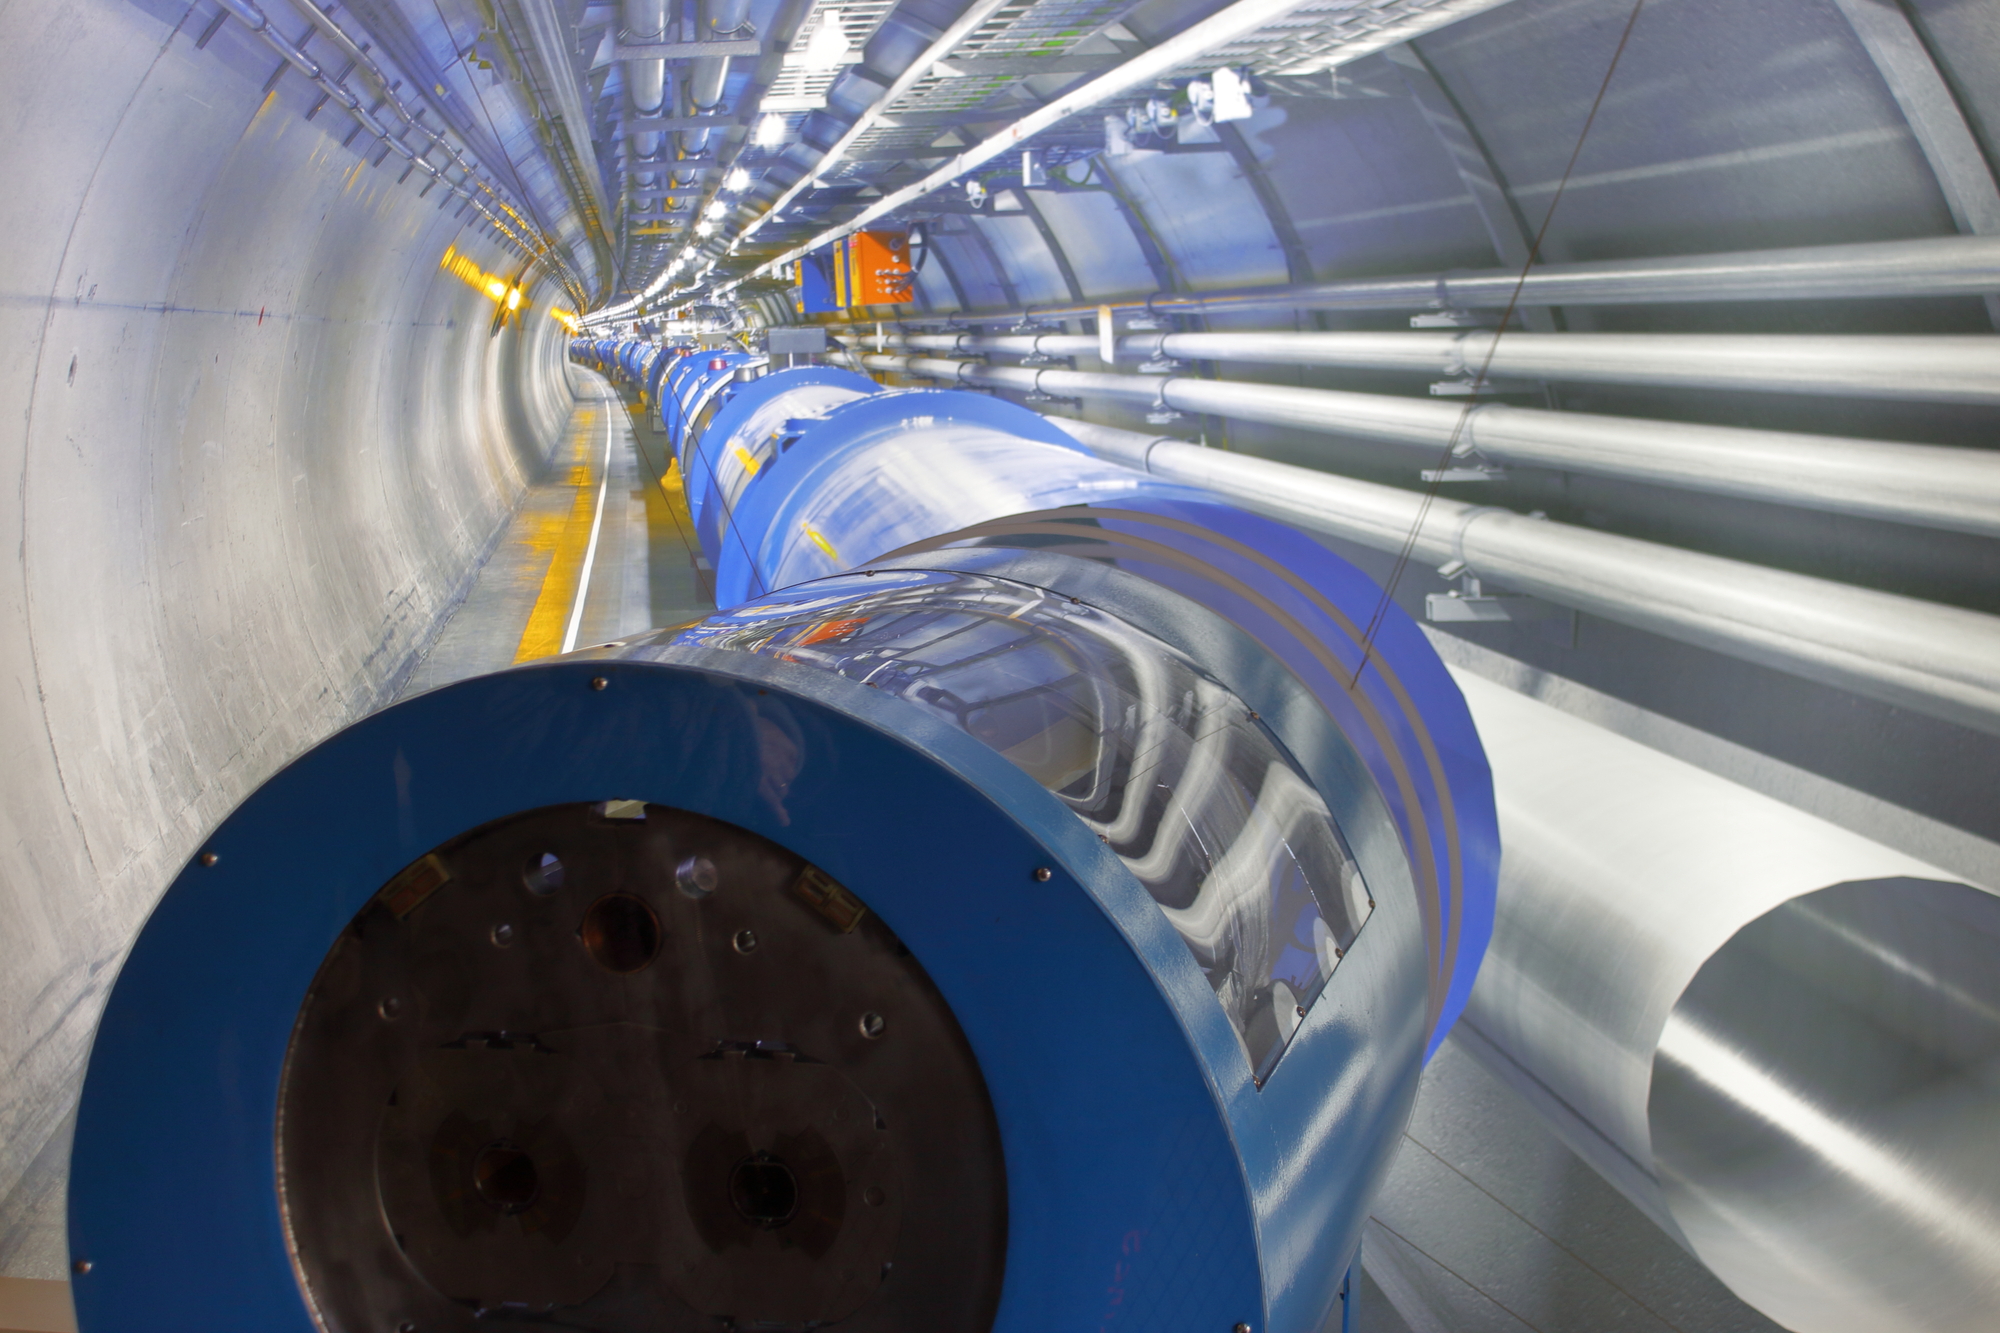 LHC consumes as much energy as a city. Can particle accelerators be greener?